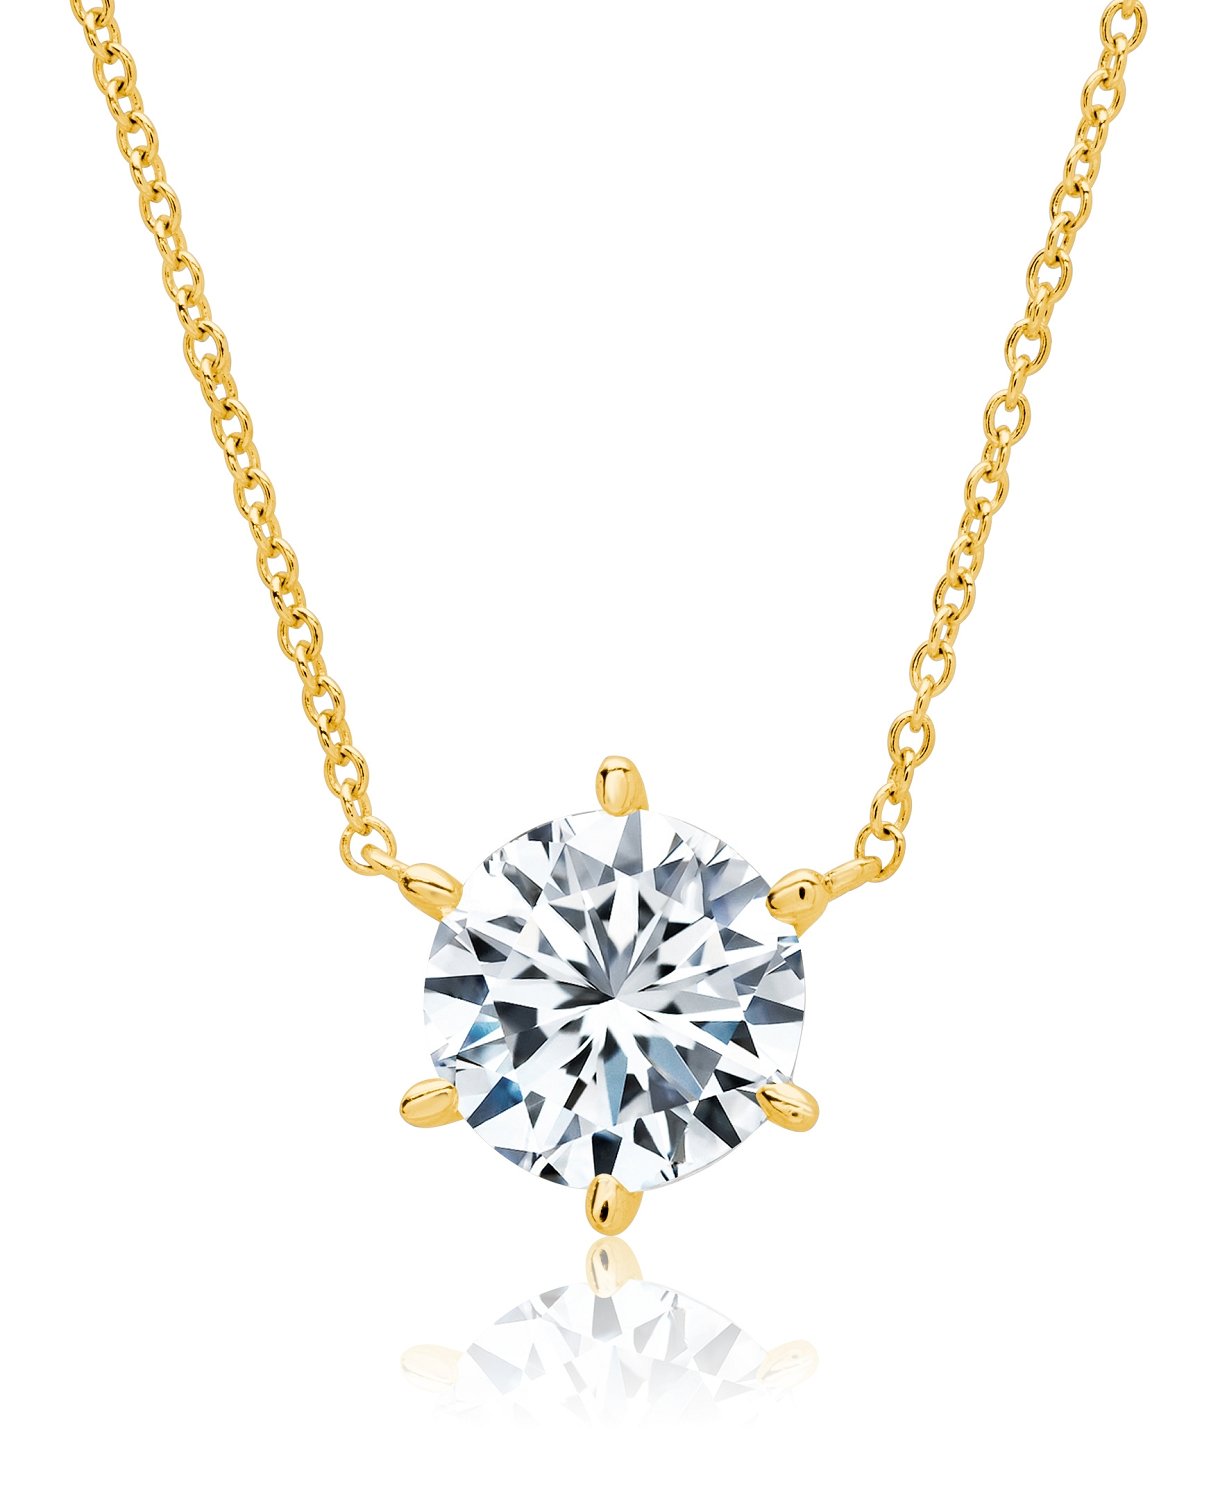 Solitaire Brilliant Necklace - 6 prong - Finished in 18kt Yellow Gold